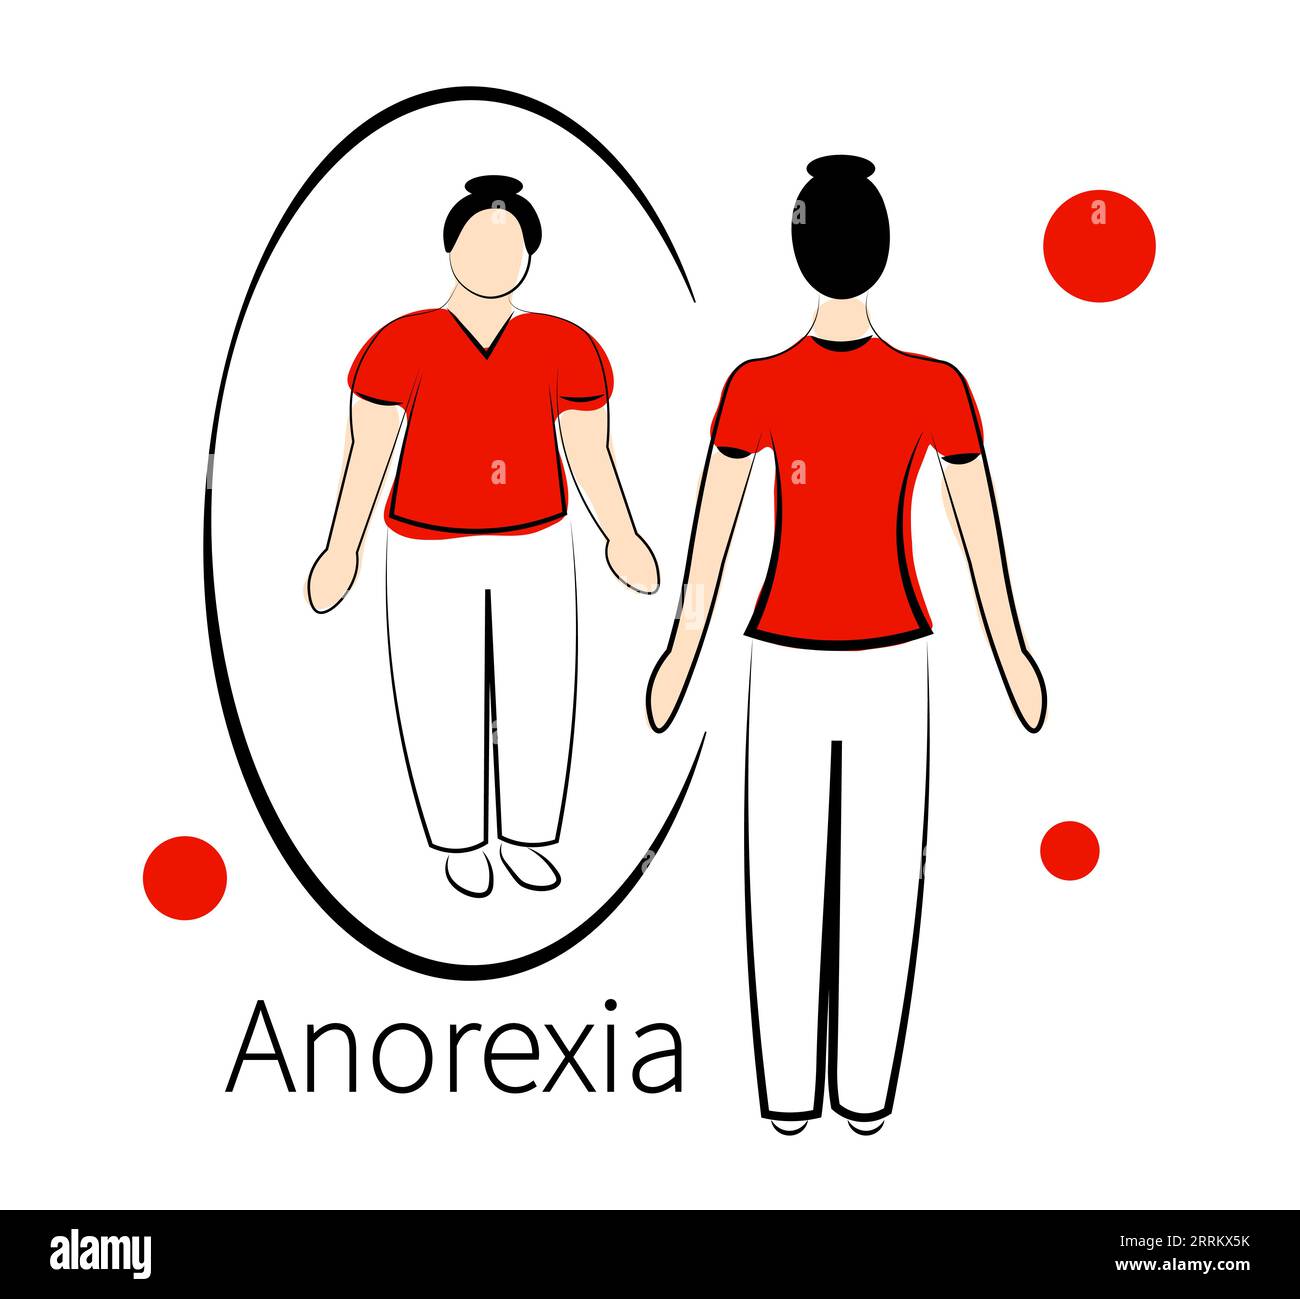 Anorexia. Eating disorders Stock Vector